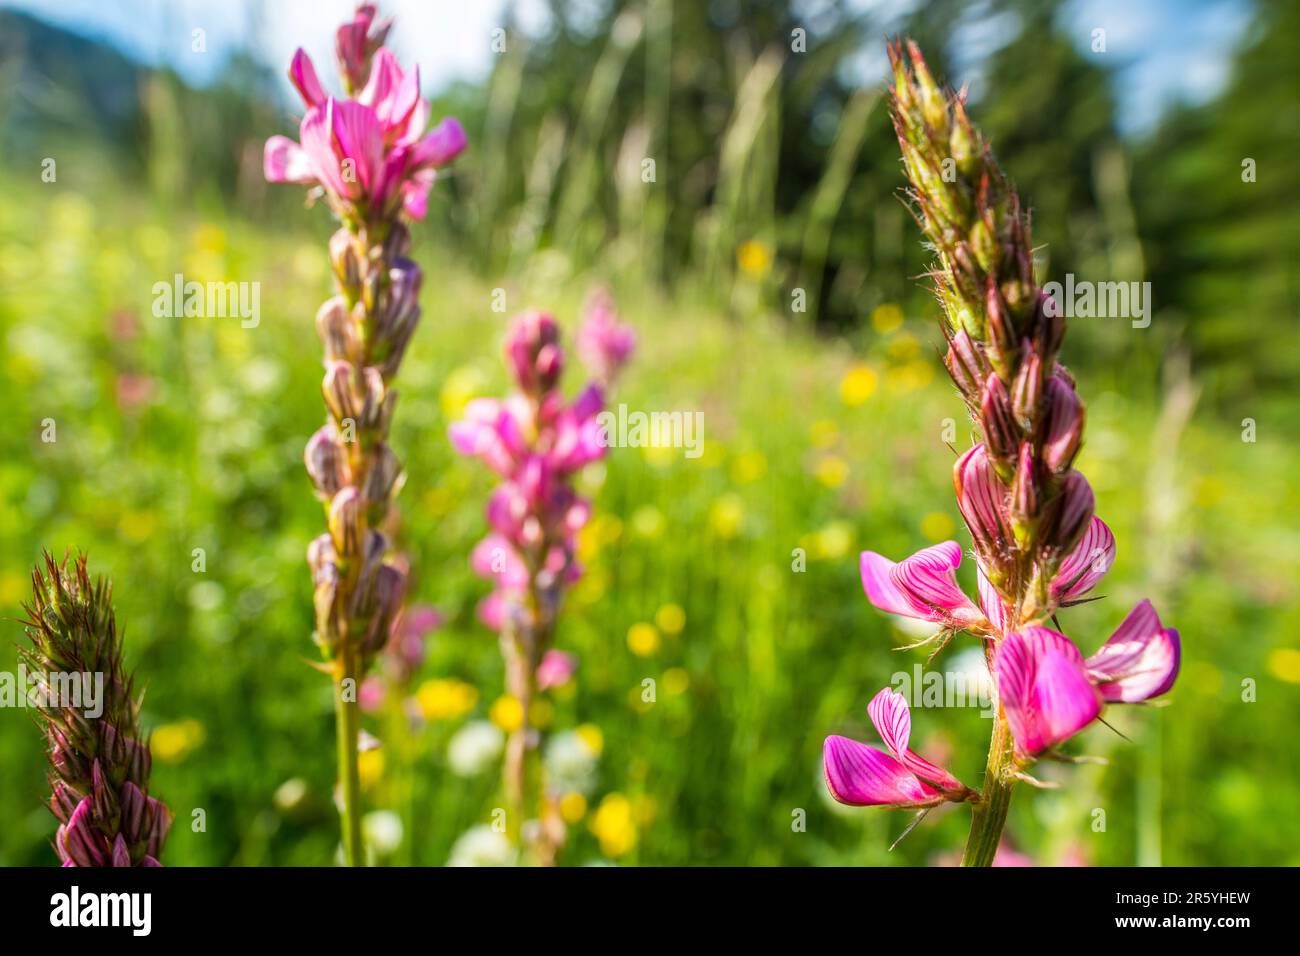 Onobrychis viciifolia, also known as O. sativa or common sainfoin has been an important forage legume in temperate regions. Stock Photo